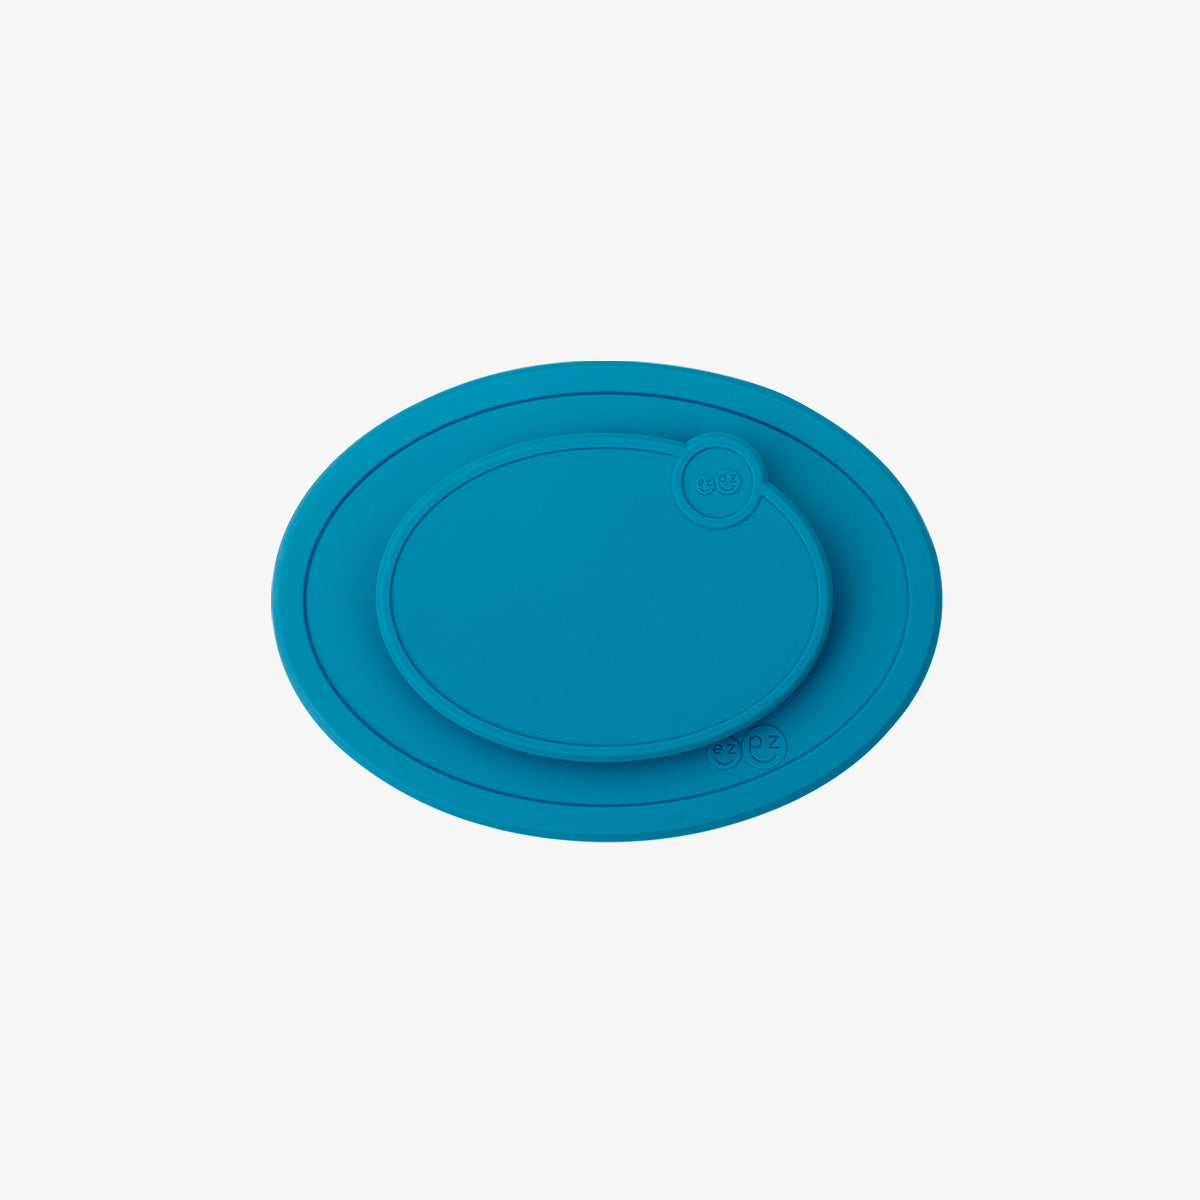 Mini Mat Lid in Blue / Storage Lids for the Mini Mat by ezpz / Silicone Lid for Toddler Plate